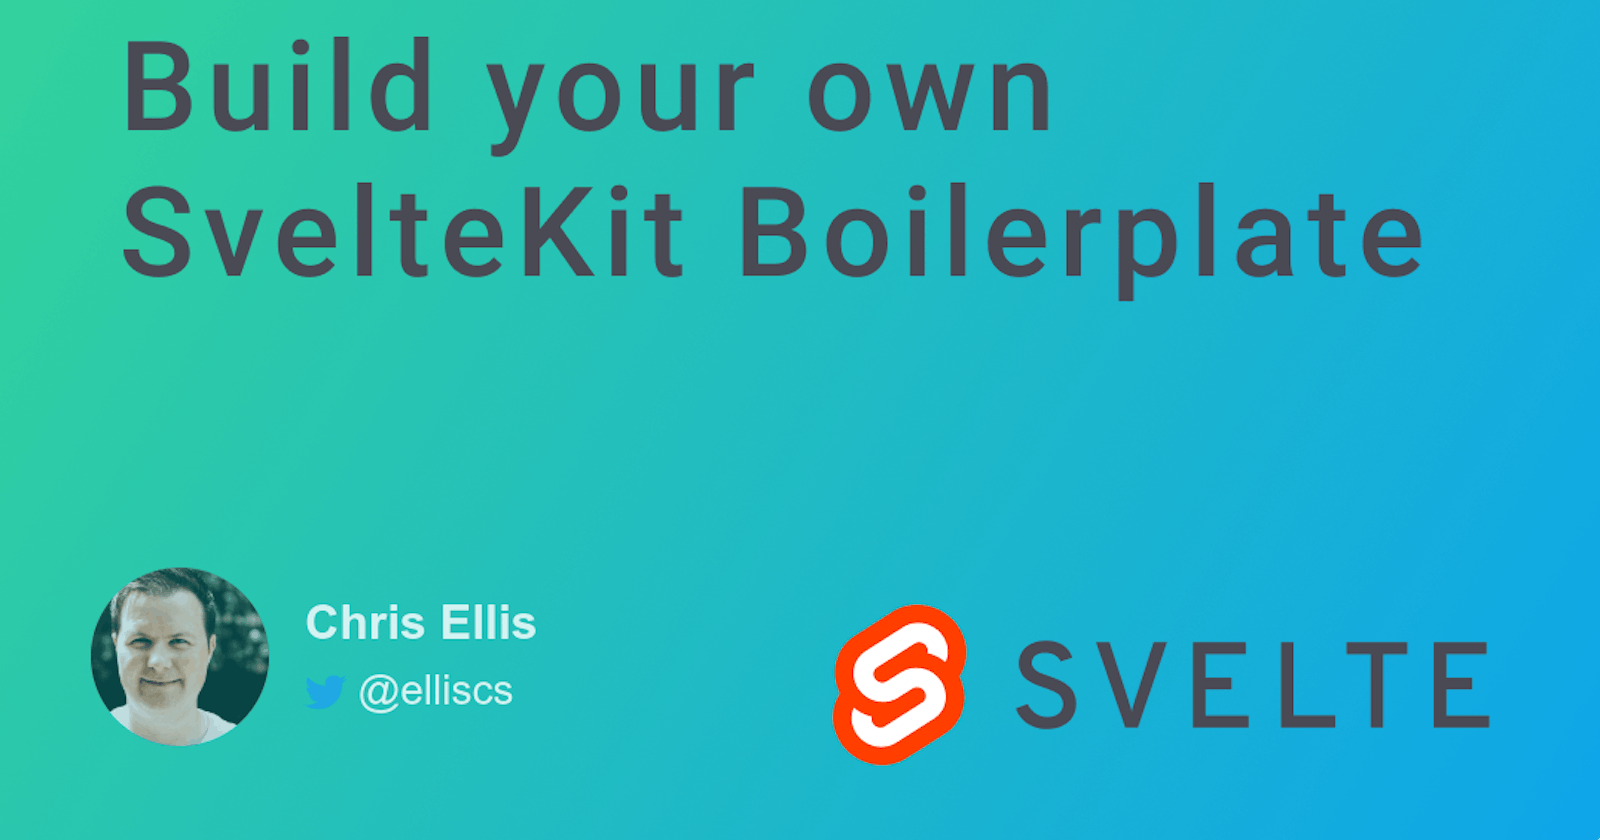 Build your own SvelteKit Boilerplate: Moving Login and starting the Landing page